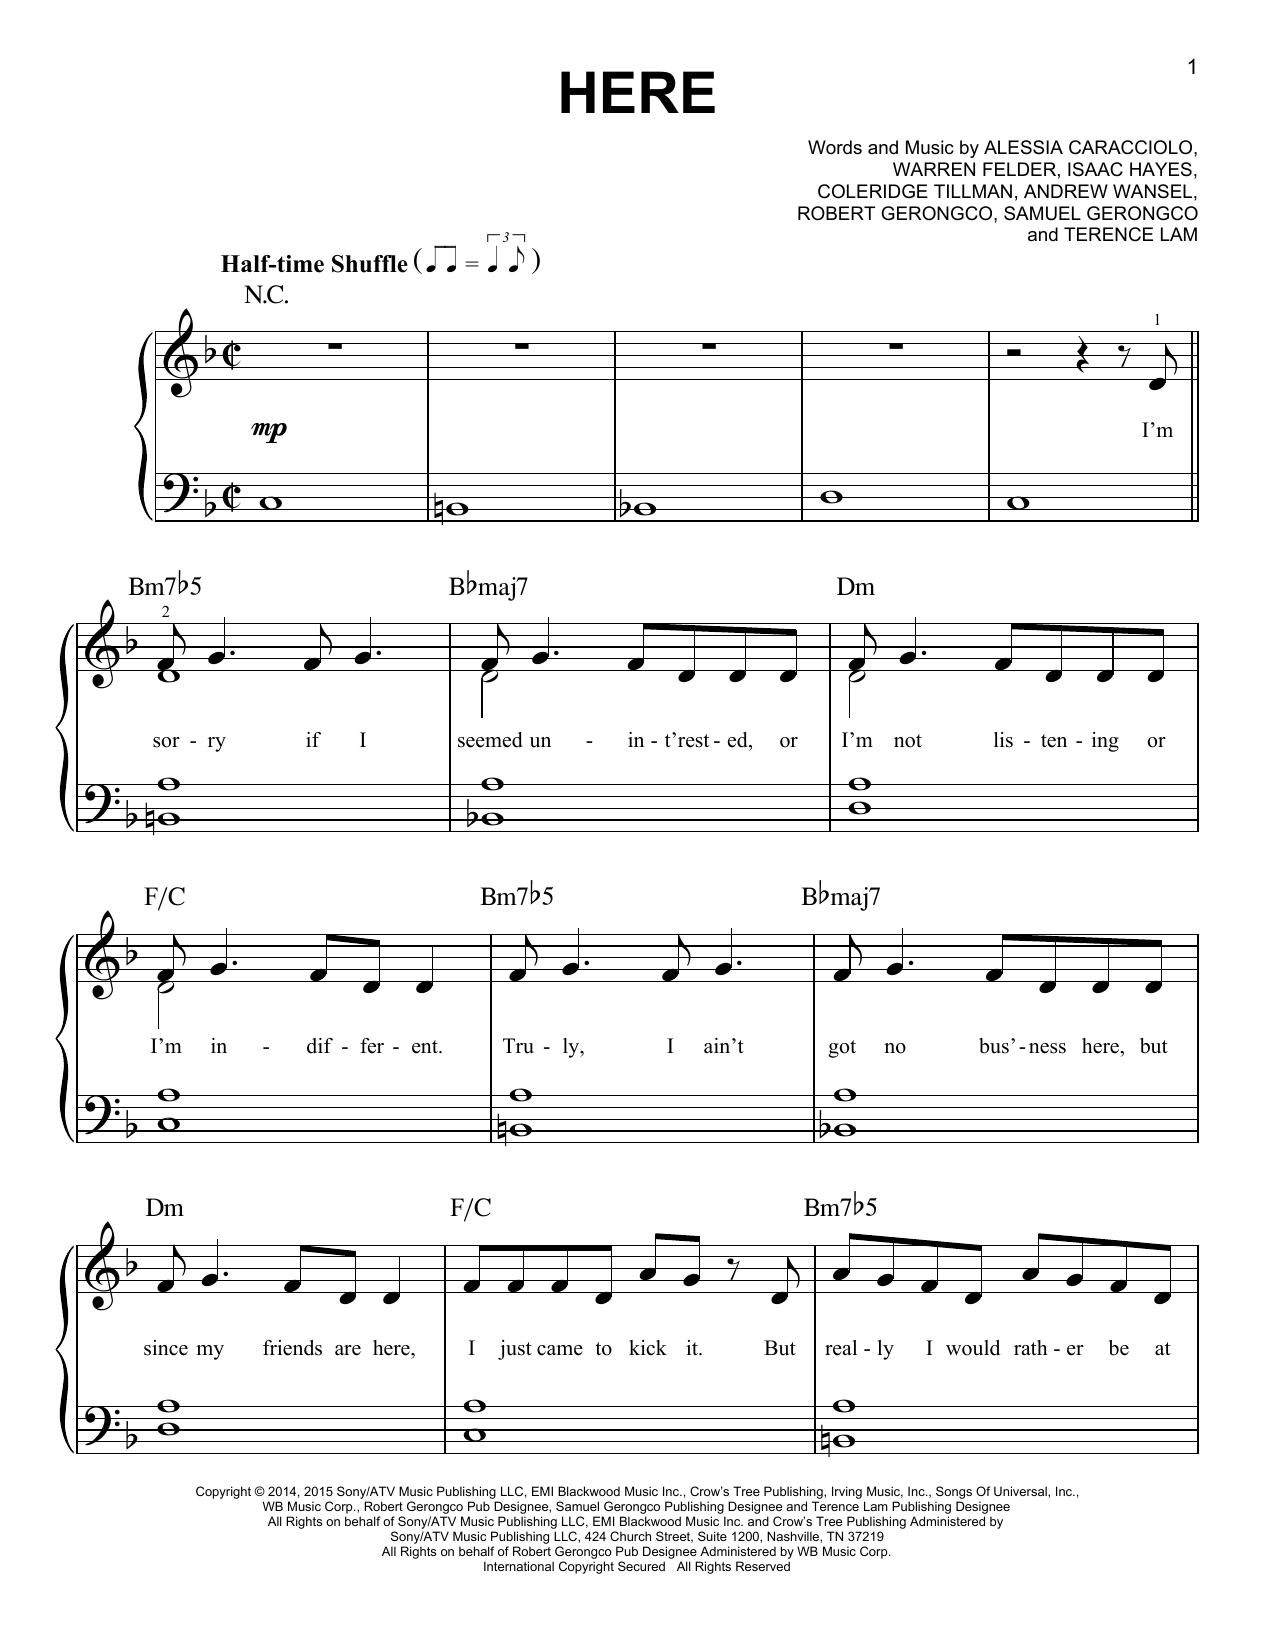 Download Alessia Cara Here Sheet Music